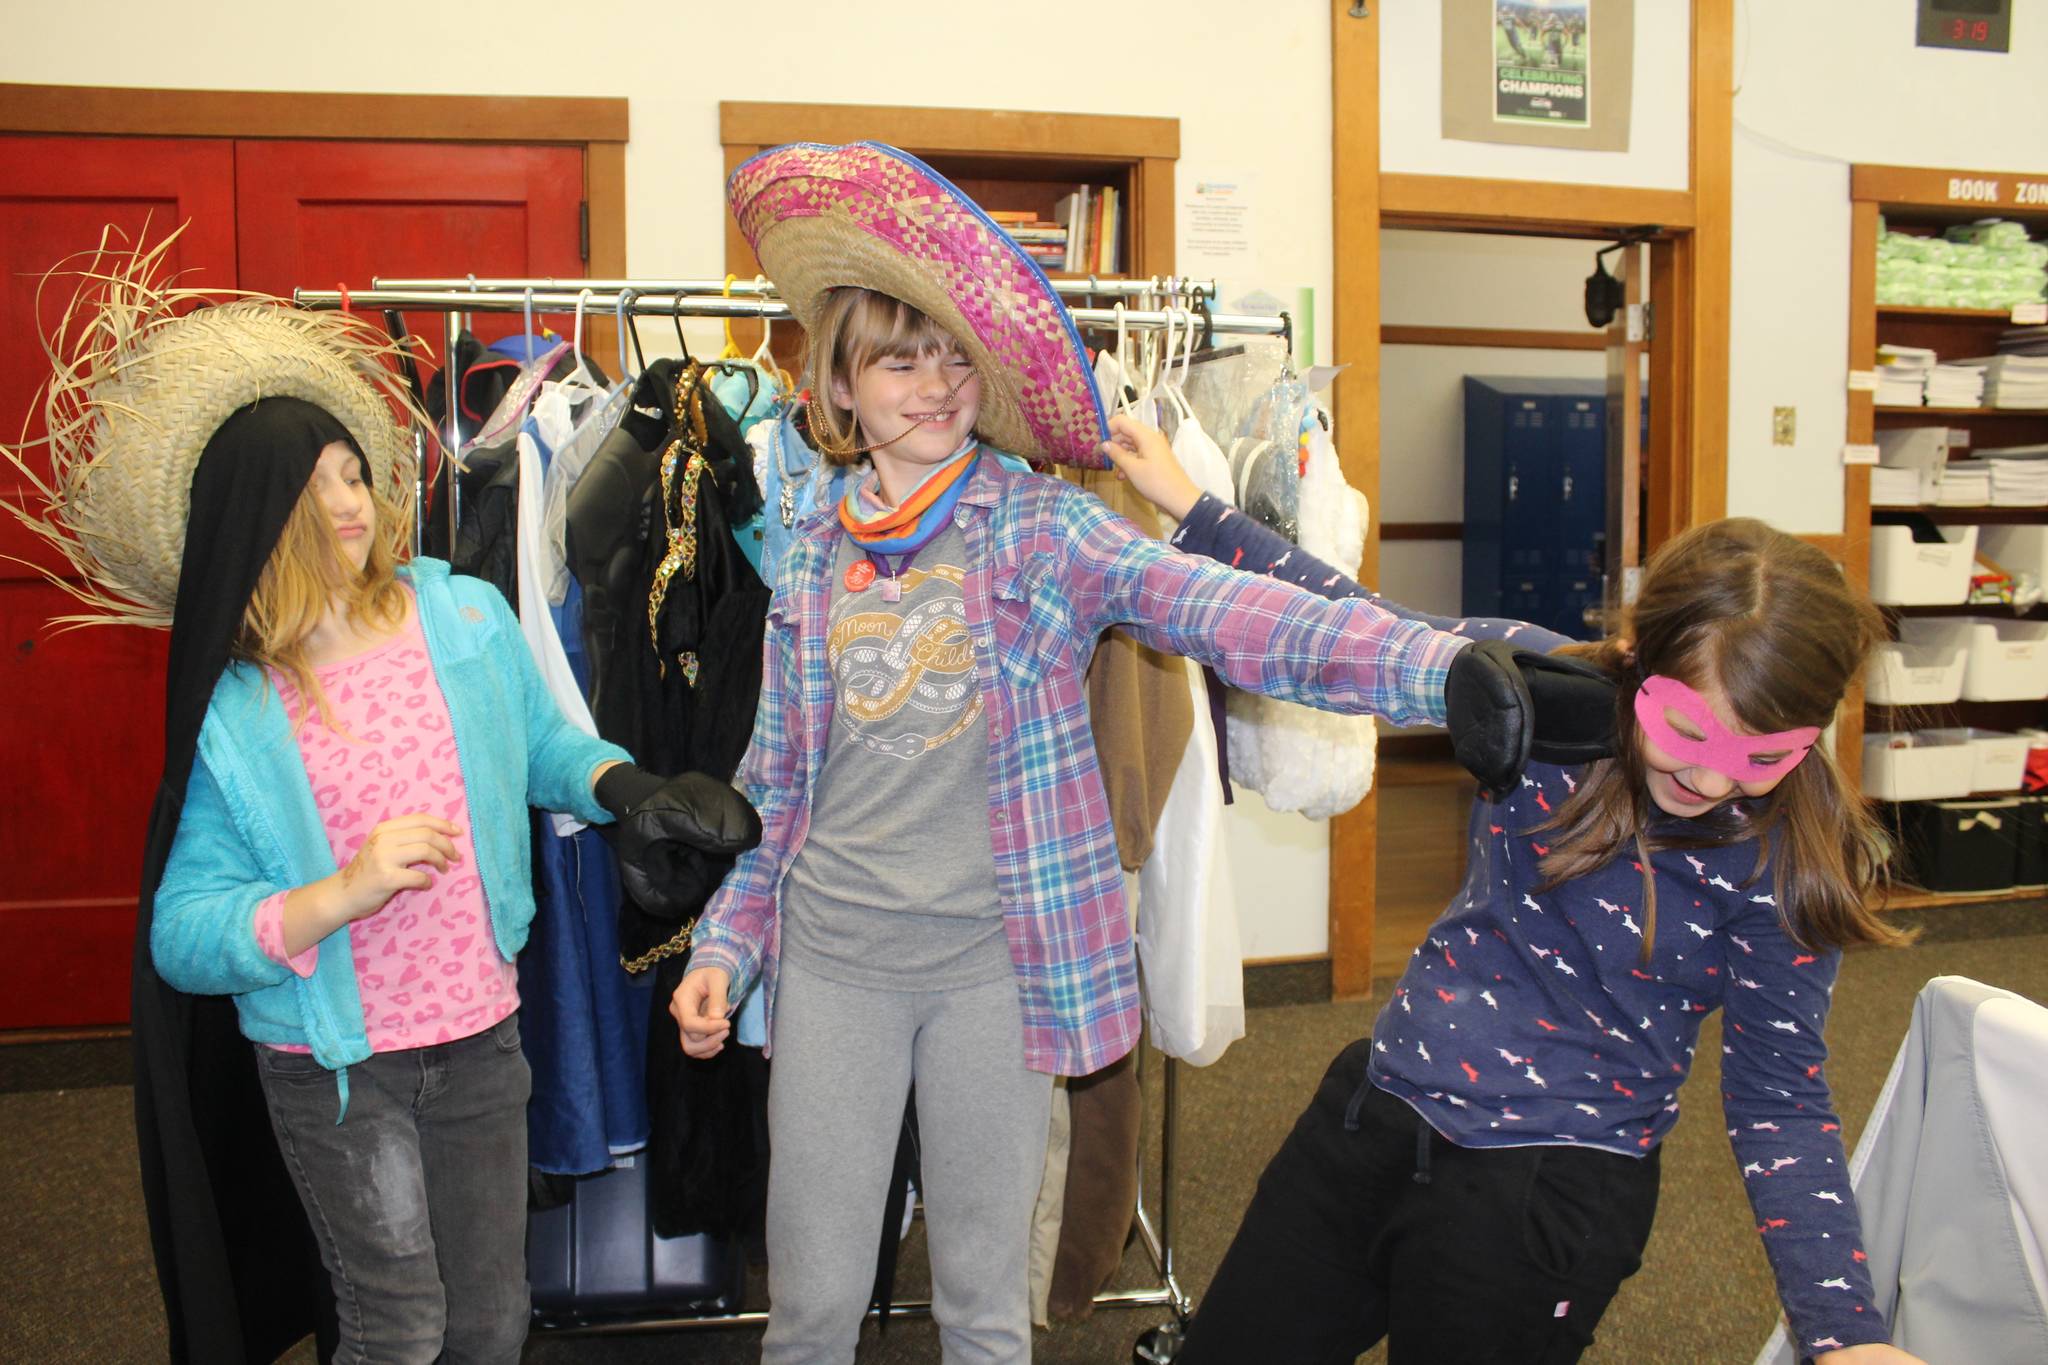 Maegan Donier, left, and sisters Ada and June Murray find matching hats and accessories at the costume swap taking place through Oct. 30 at Langley’s Family Resource Center. Photo by Wendy Leigh / South Whidbey Record